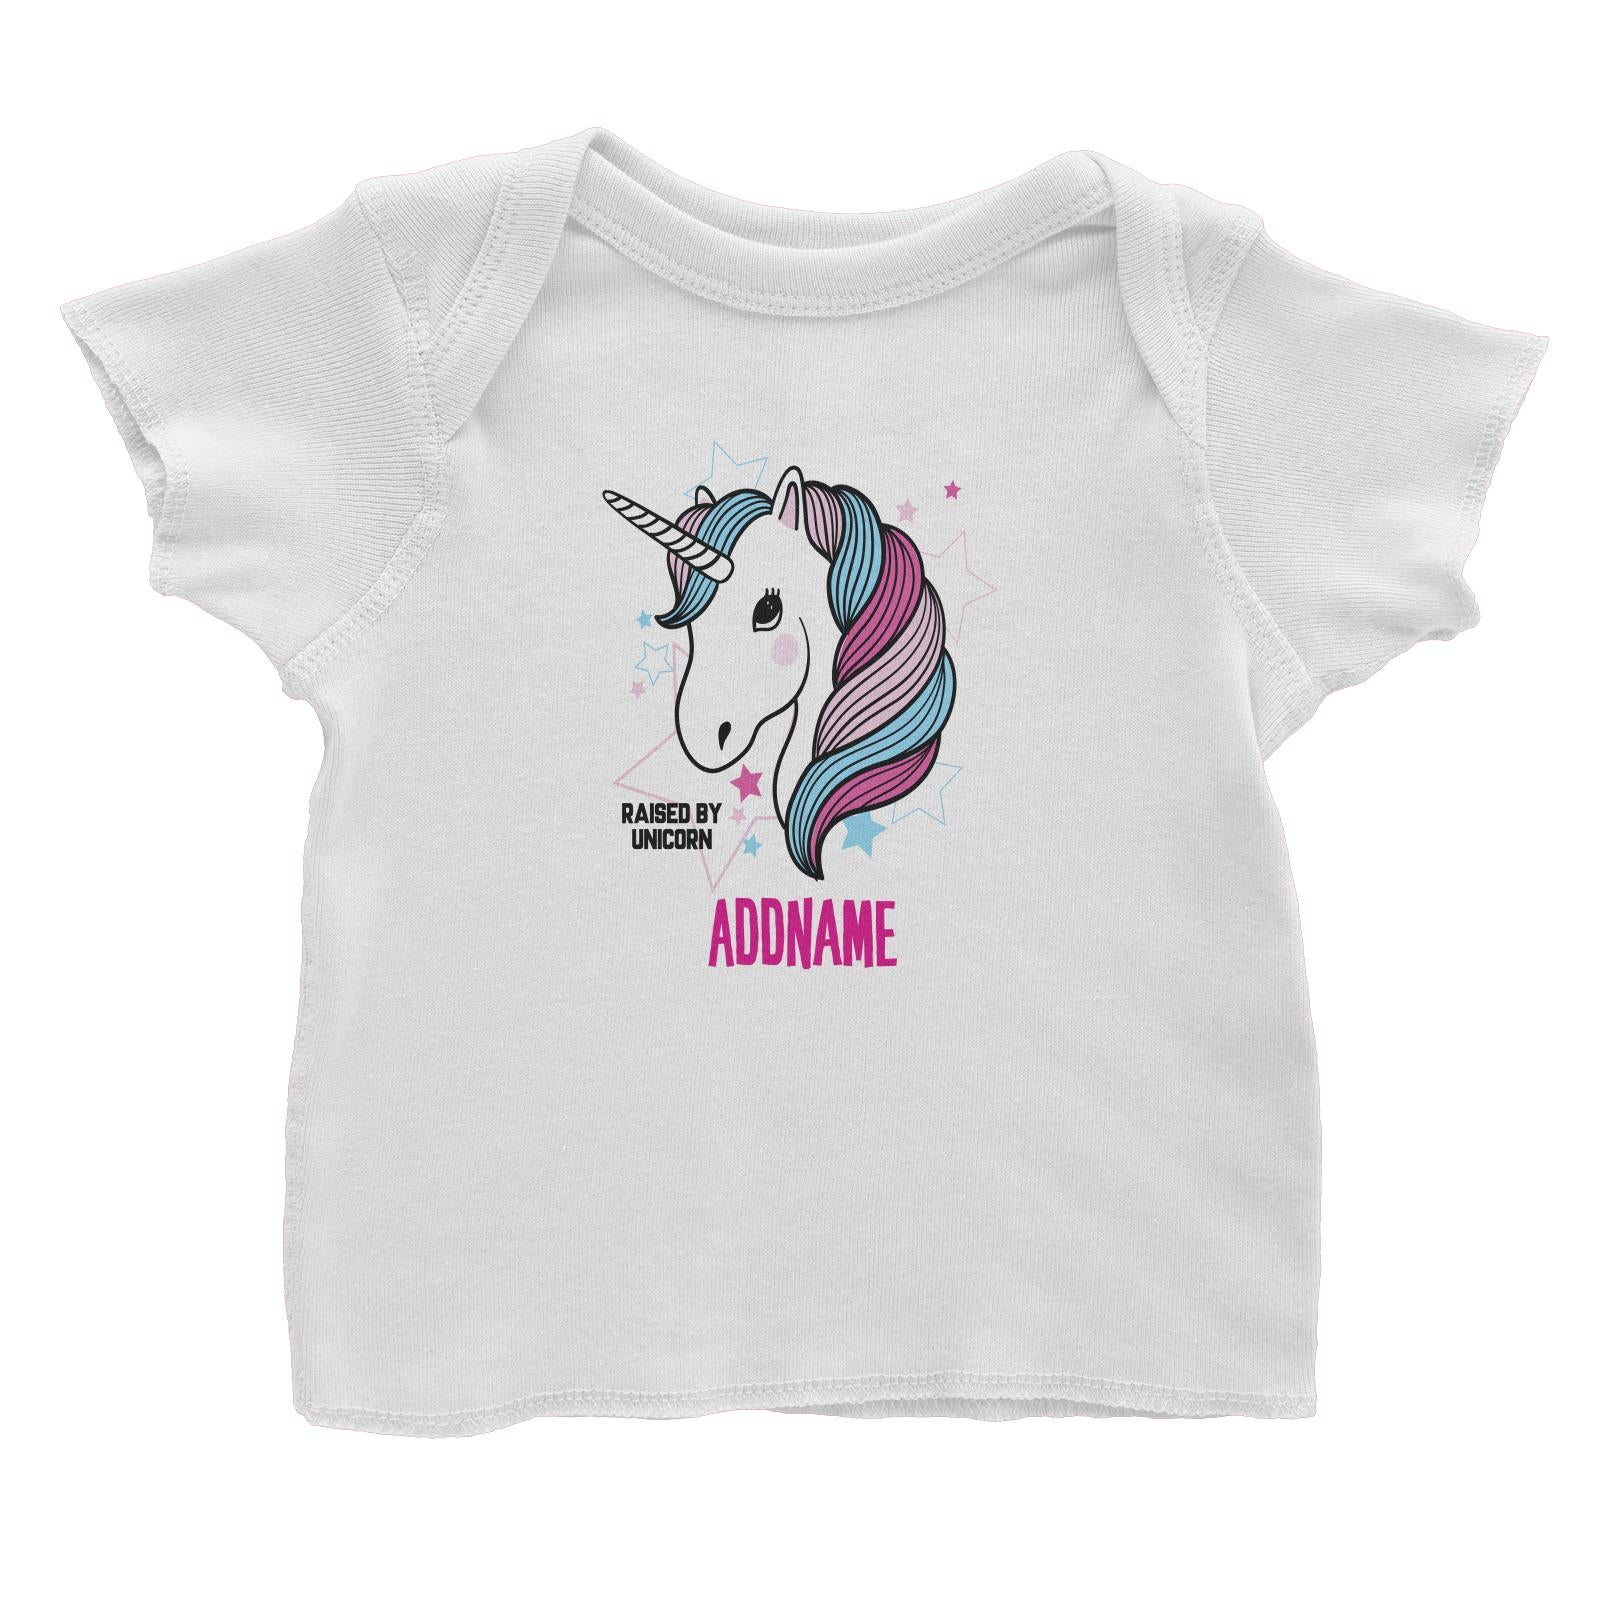 Cool Vibrant Series Raised By Unicorn Addname Baby T-Shirt [SALE]